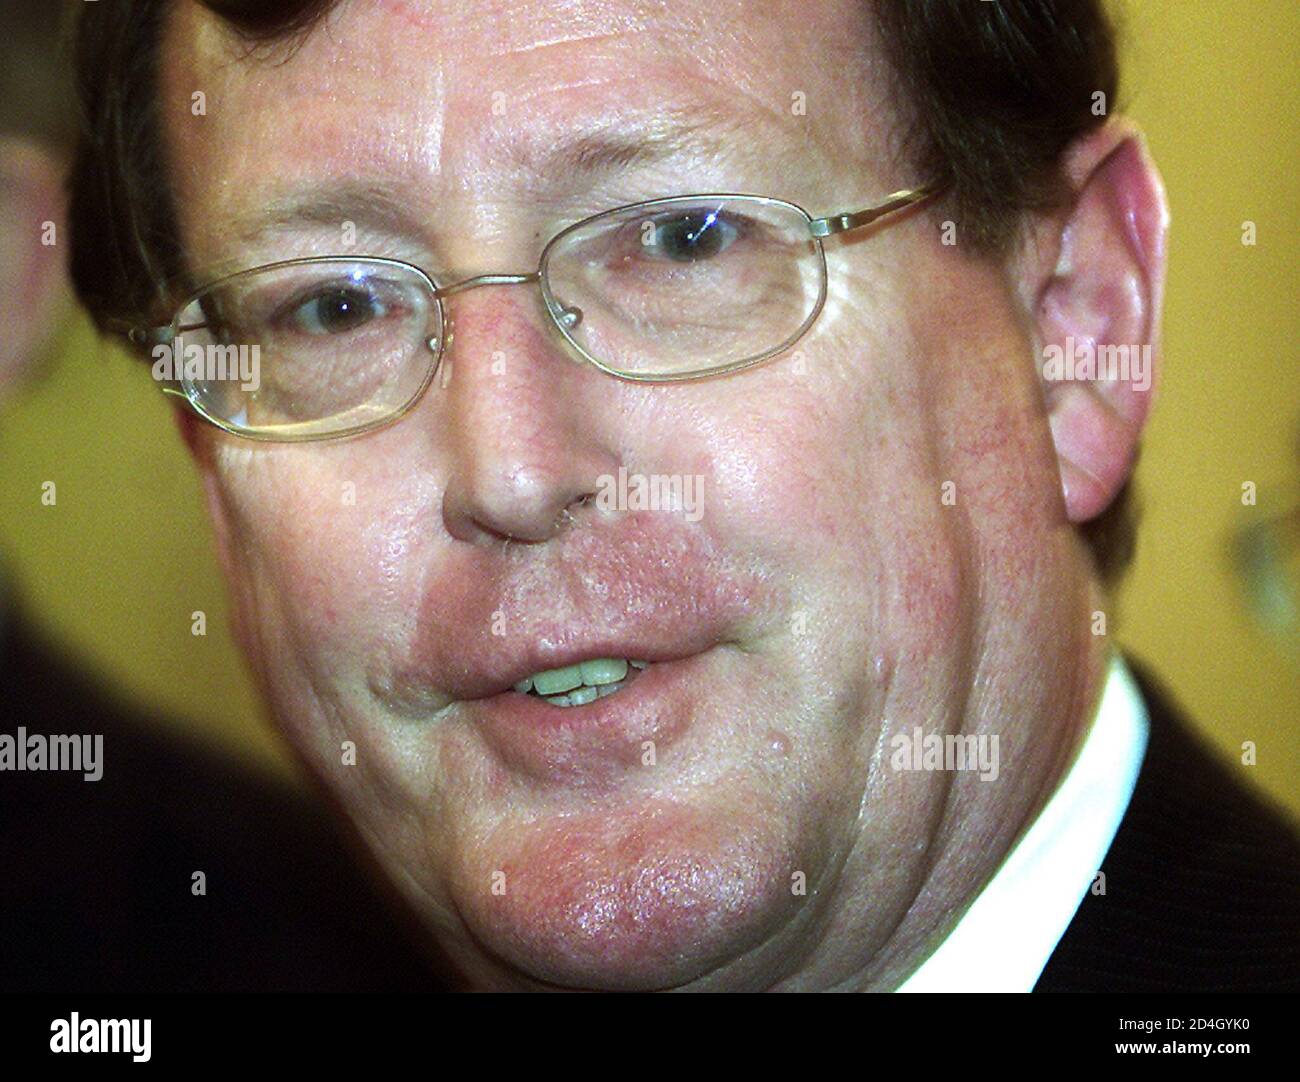 Ulster Unionist Party leader David Trimble looks towards the media during a press conference inside Stormont Parliment Buildings, Belfast, October 18, 2001. Protestant politicians said on Thursday they would quit Northern Ireland's ruling coalition at midnight to try to force the IRA to start disarming. REUTERS/Paul McErlane  PM/AA Stock Photo